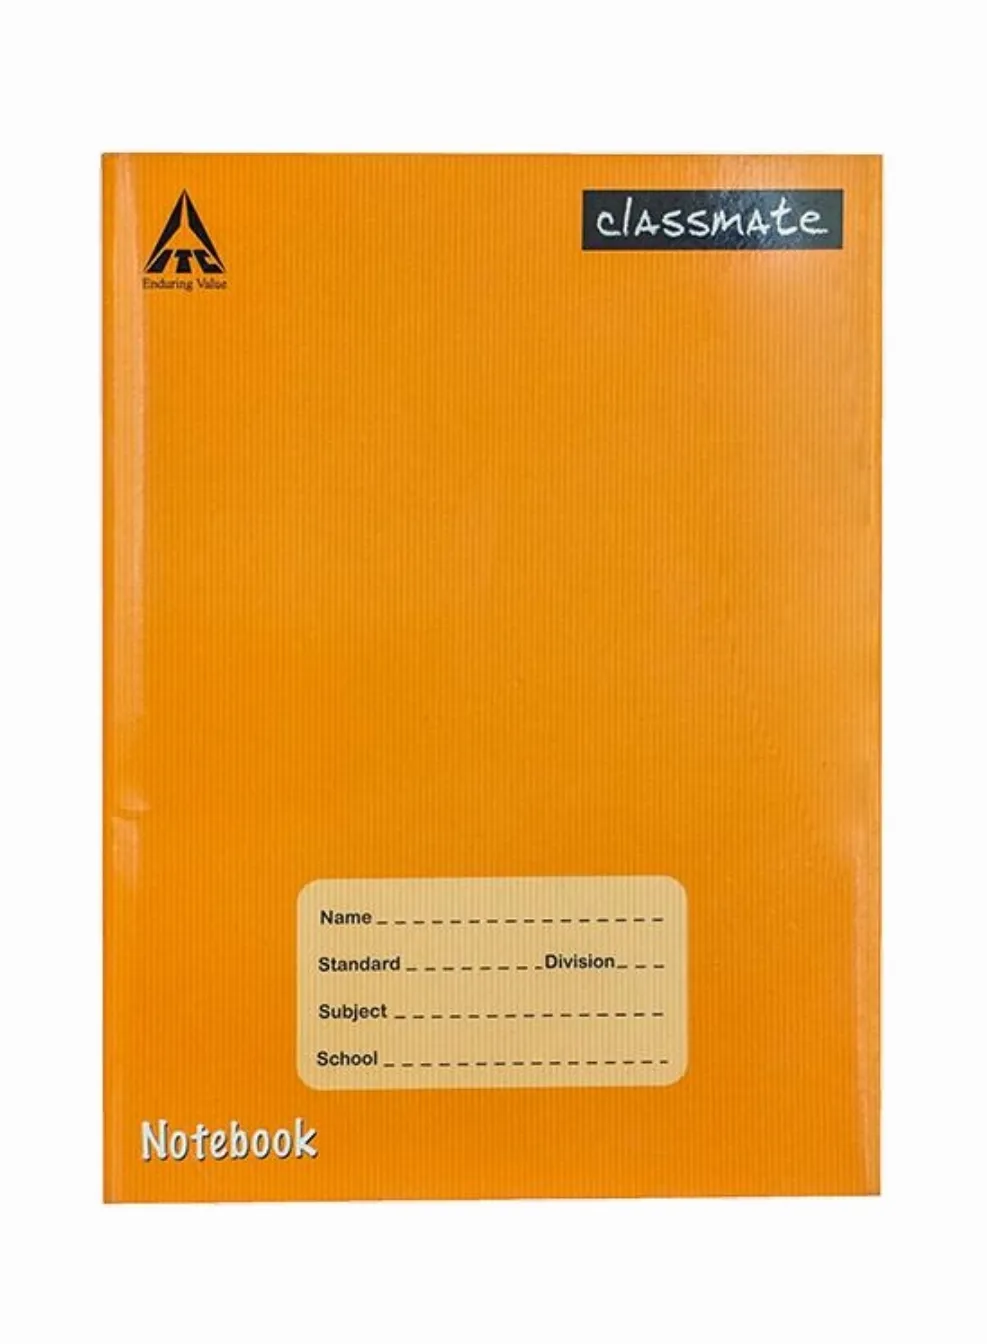 Classmate English Notebook Soft Cover Four Line With Gap 172 Pages 24X18 Cm Pack of 1